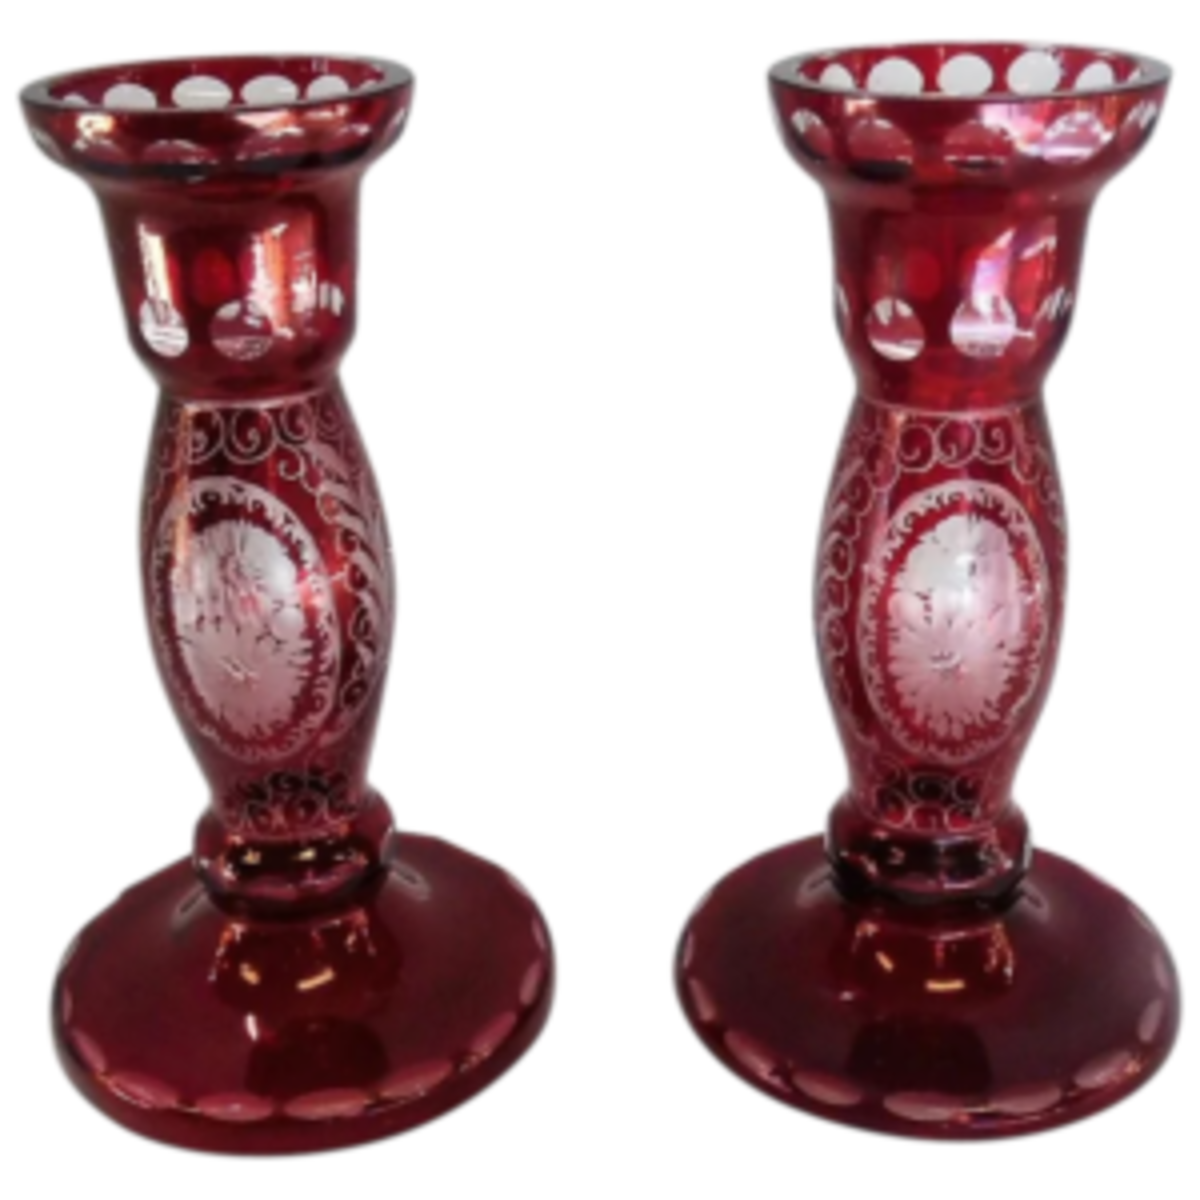  A stunning pair of ruby red candleholders adds a pretty pop of color to any table; $107. Courtesy of Bearski Gallery LLC: rubylane.com/shop/bearski-gallery